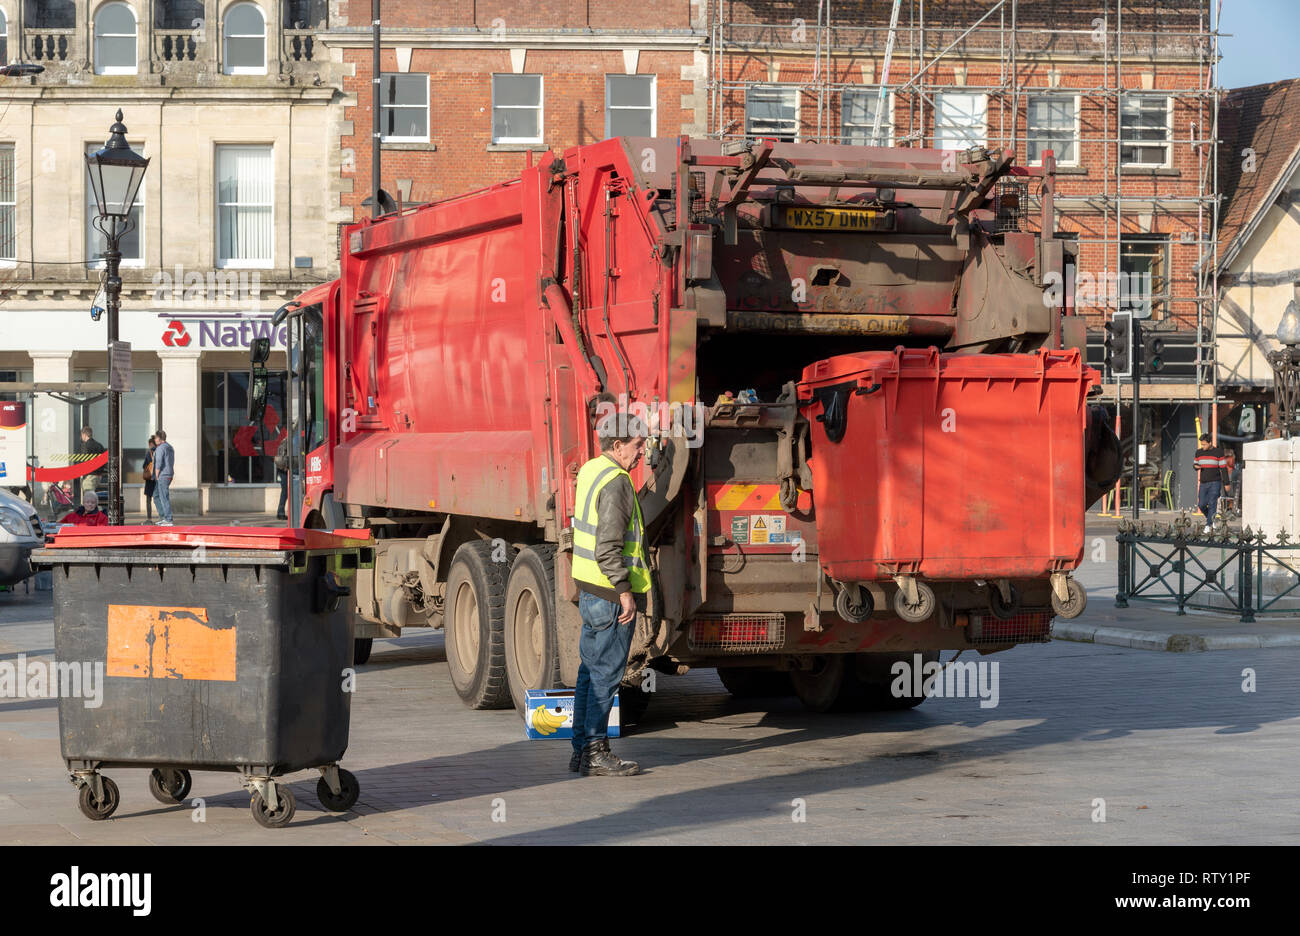 Salisbury, Wiltshire, England, UK. February 2019. Operative loading a commercial size red refuse bin into a truck in the city centre. Stock Photo